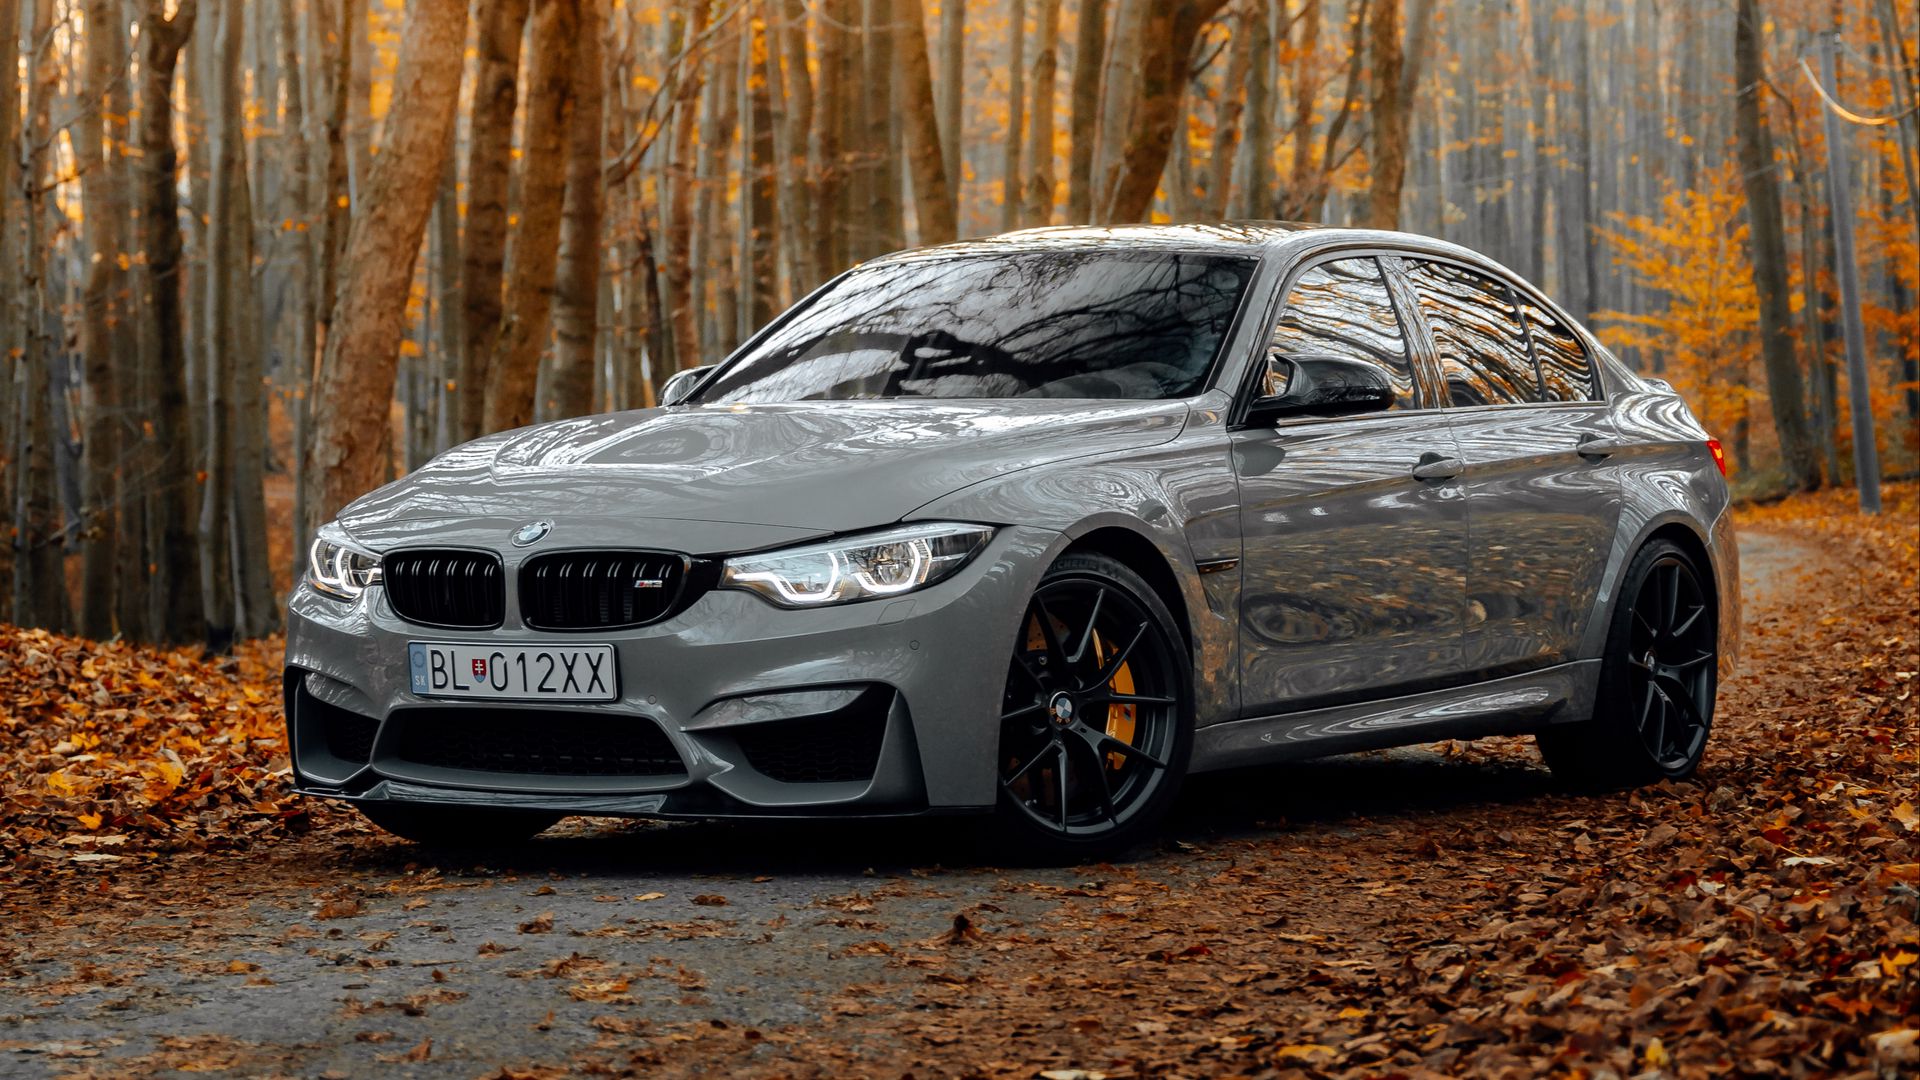 Download wallpaper 1920x1080 bmw m3, bmw, car, gray, side view, forest